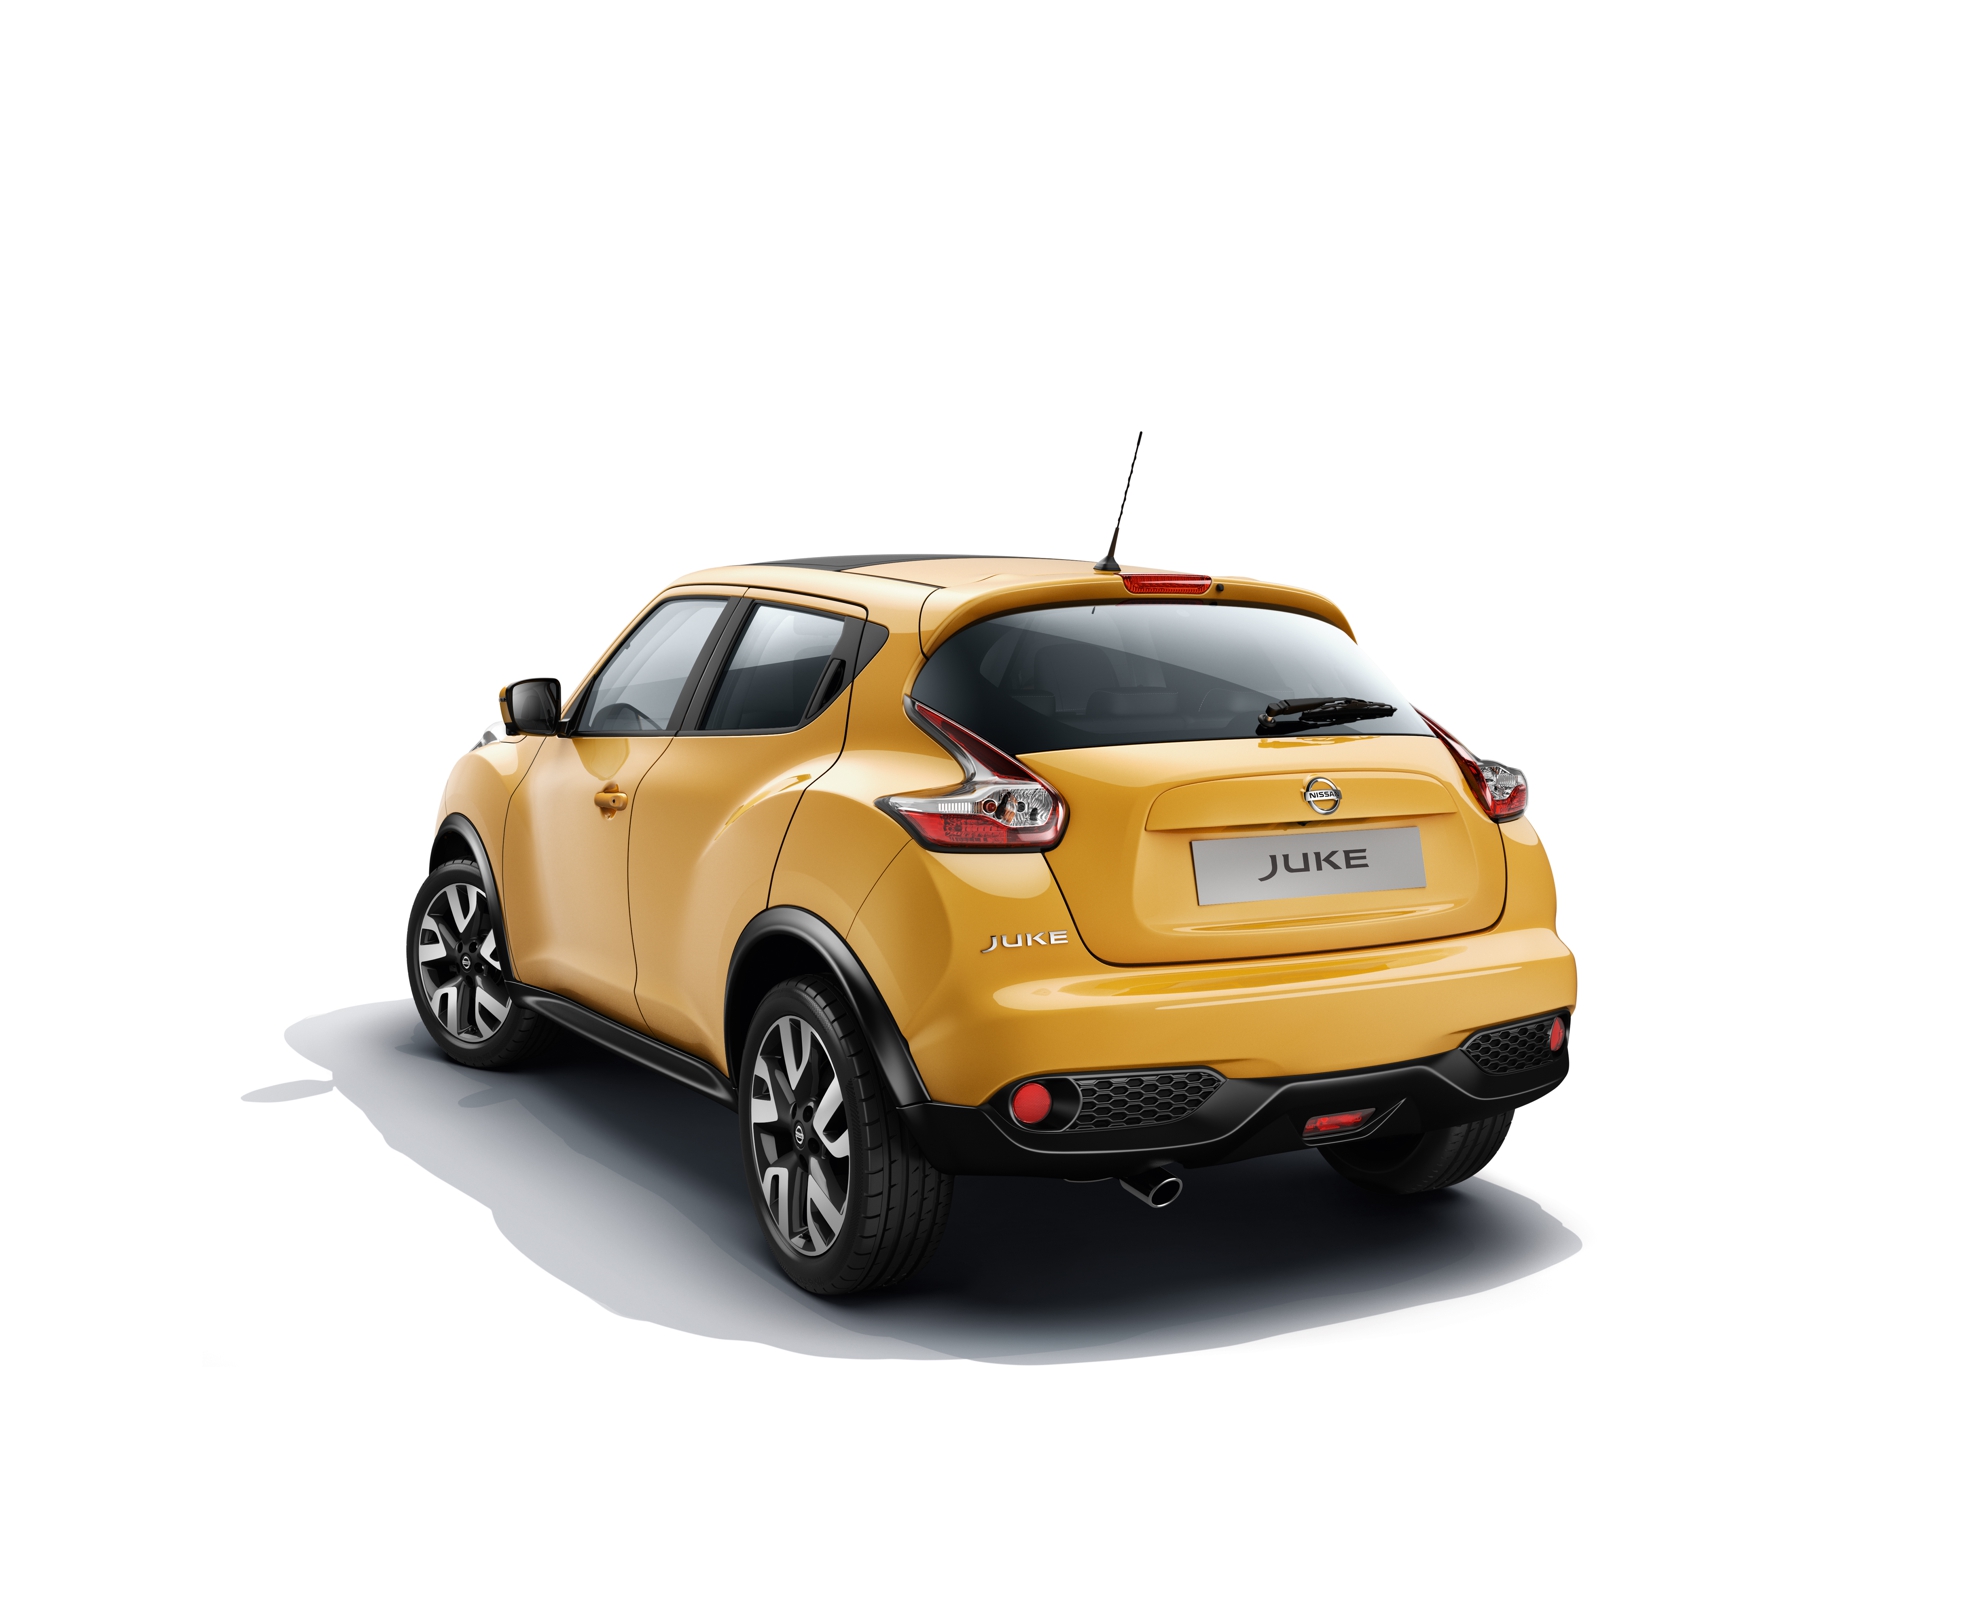 Nissan Juke ready for round two with more in-your-face Juke